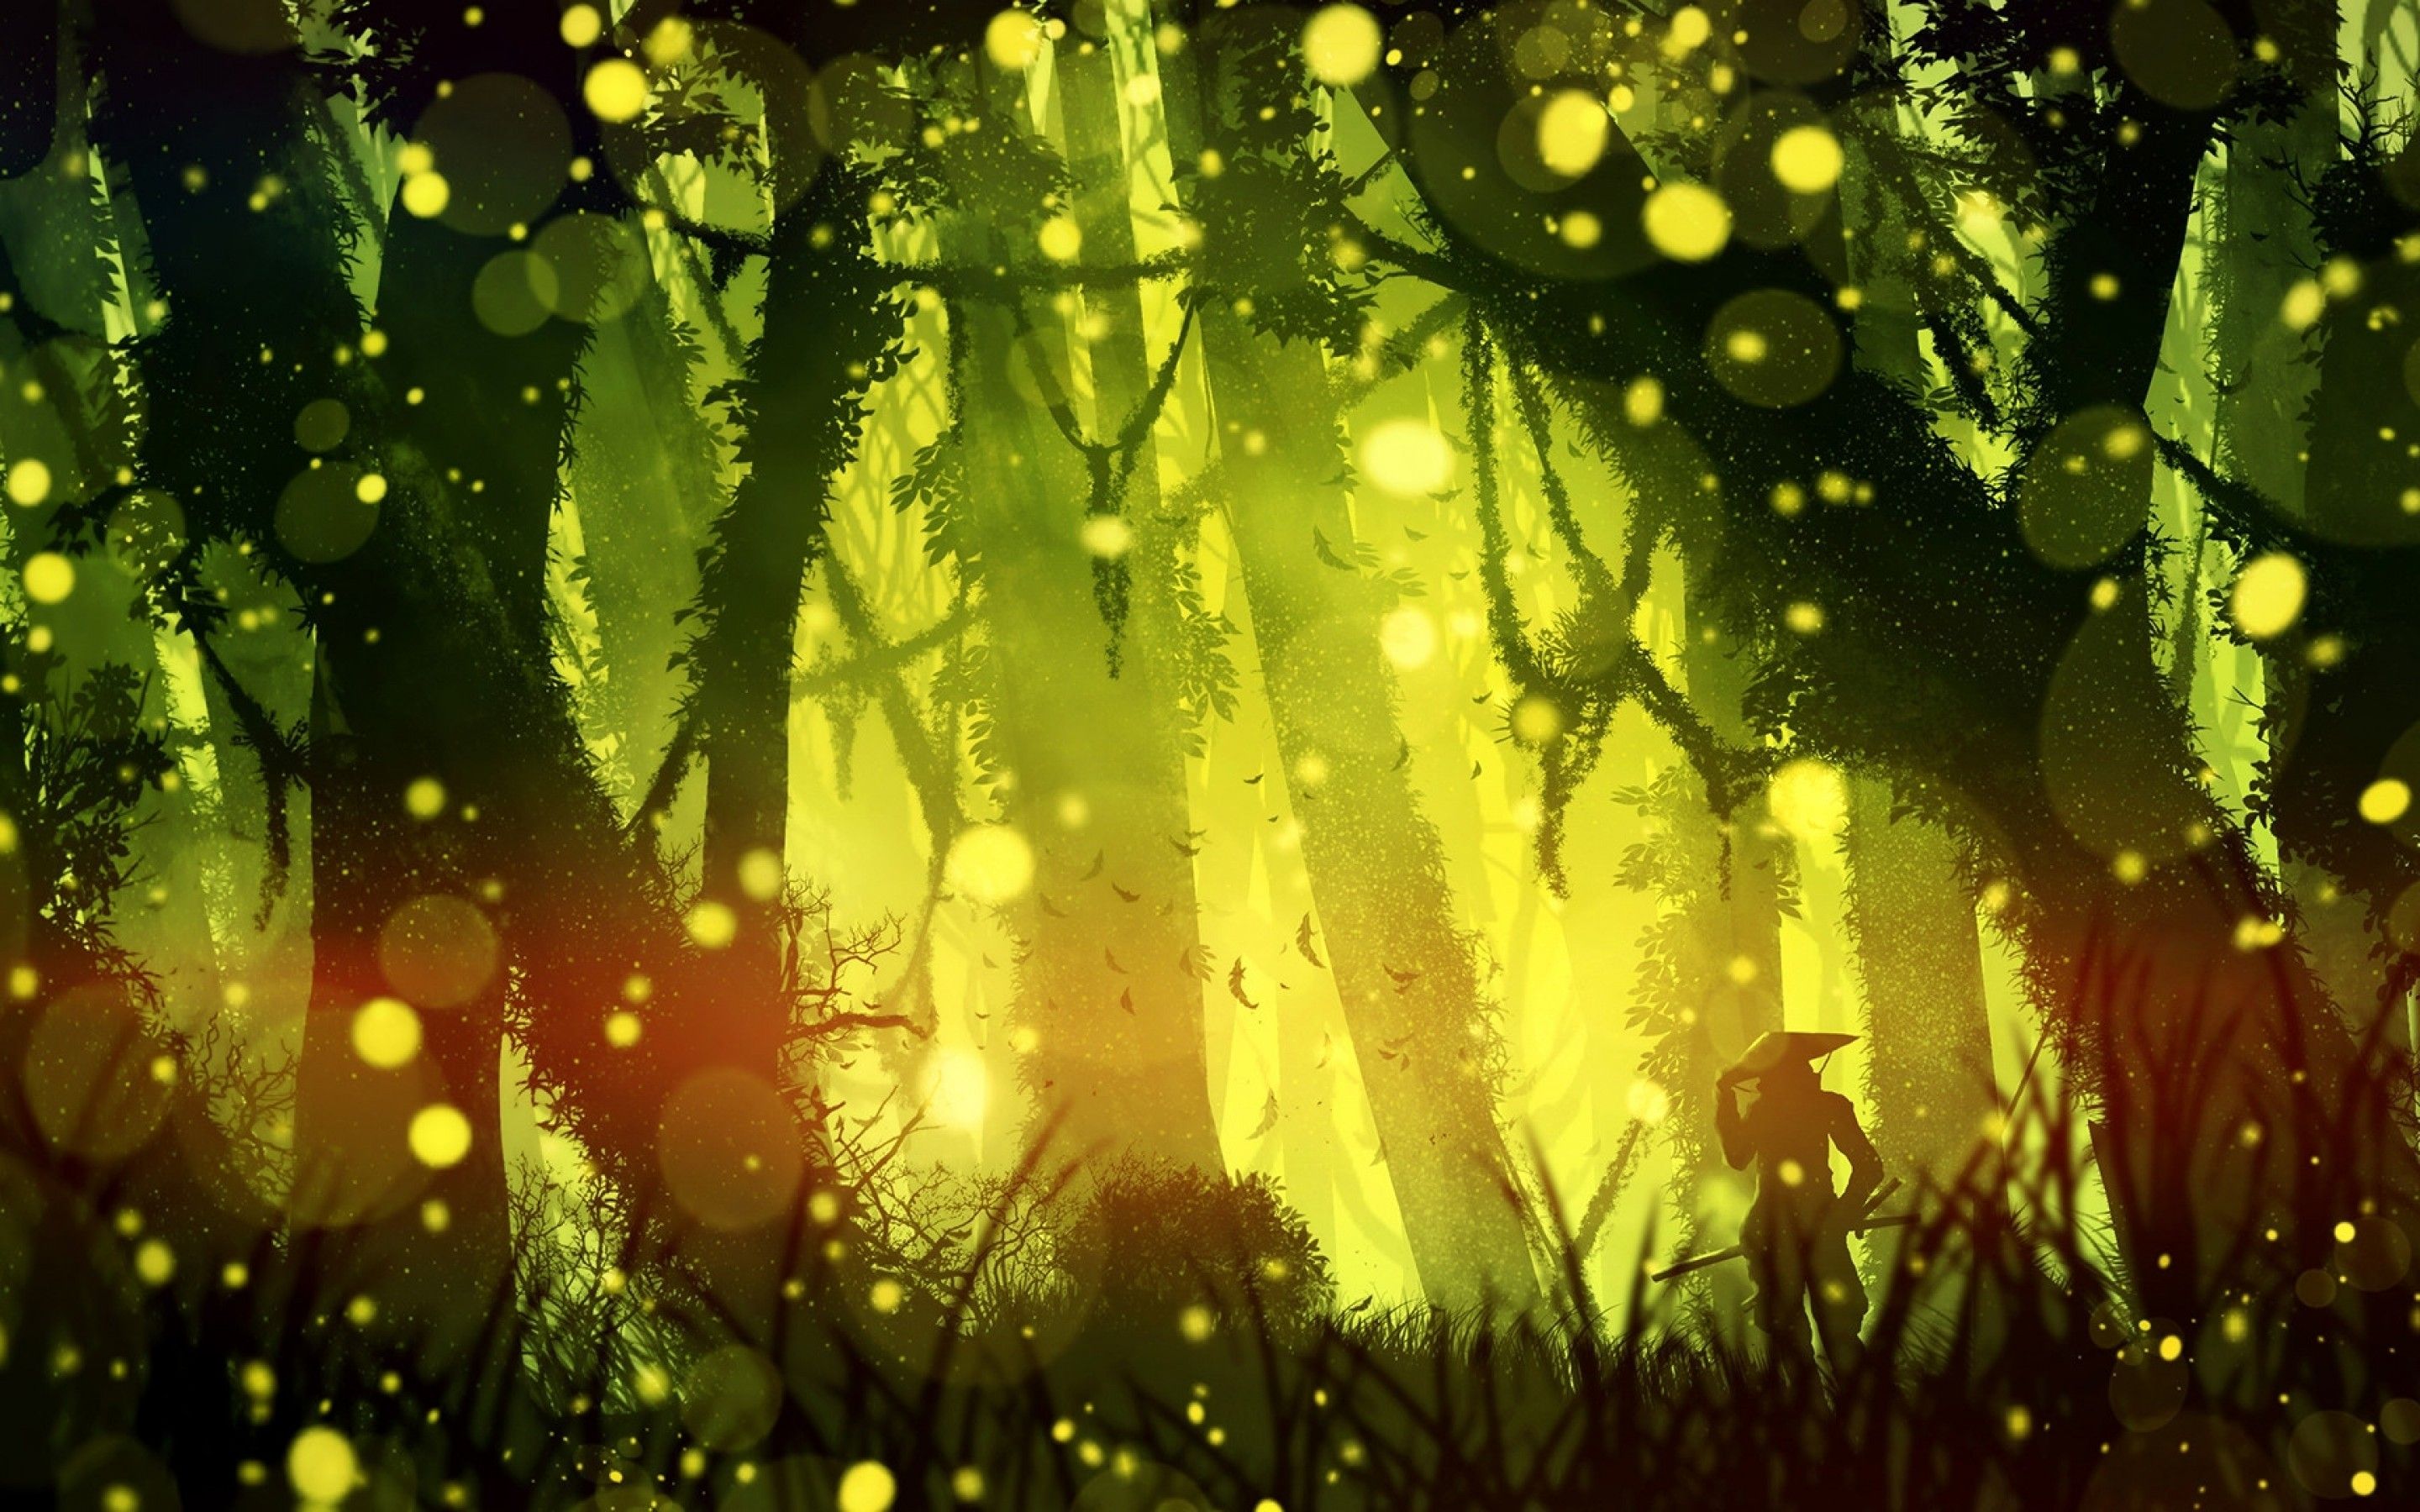 Download 2880x1800 Ninja, Forest, Green, Firefly, Silhouette